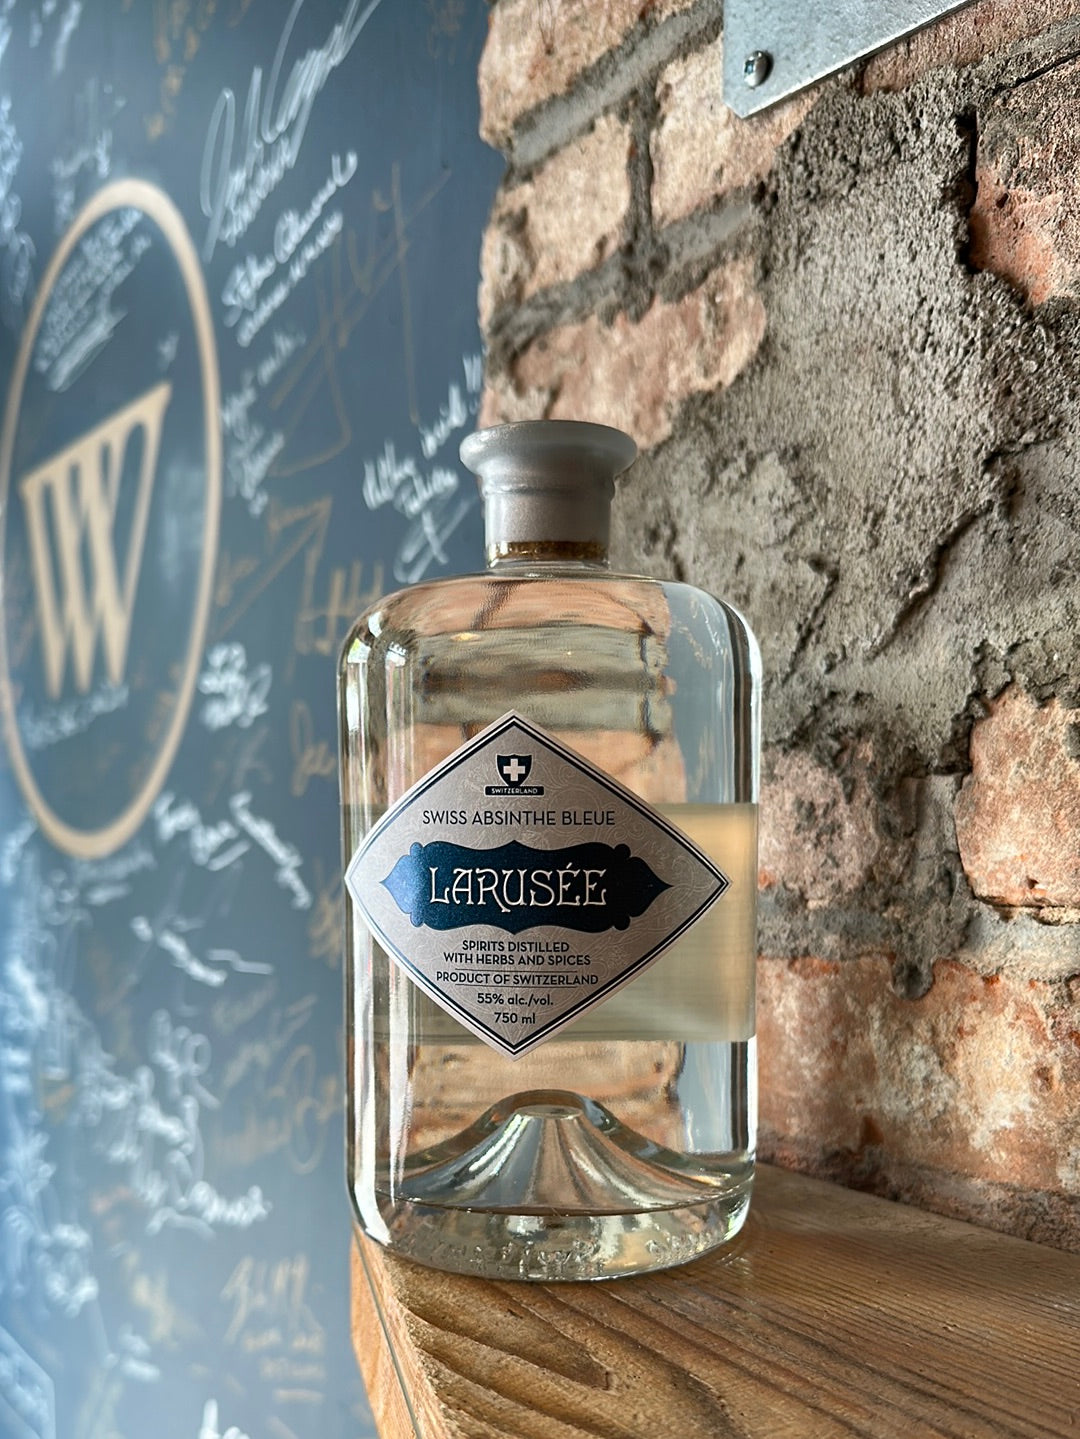 Larusee Swiss Absinthe Bleue [NY STATE ONLY]